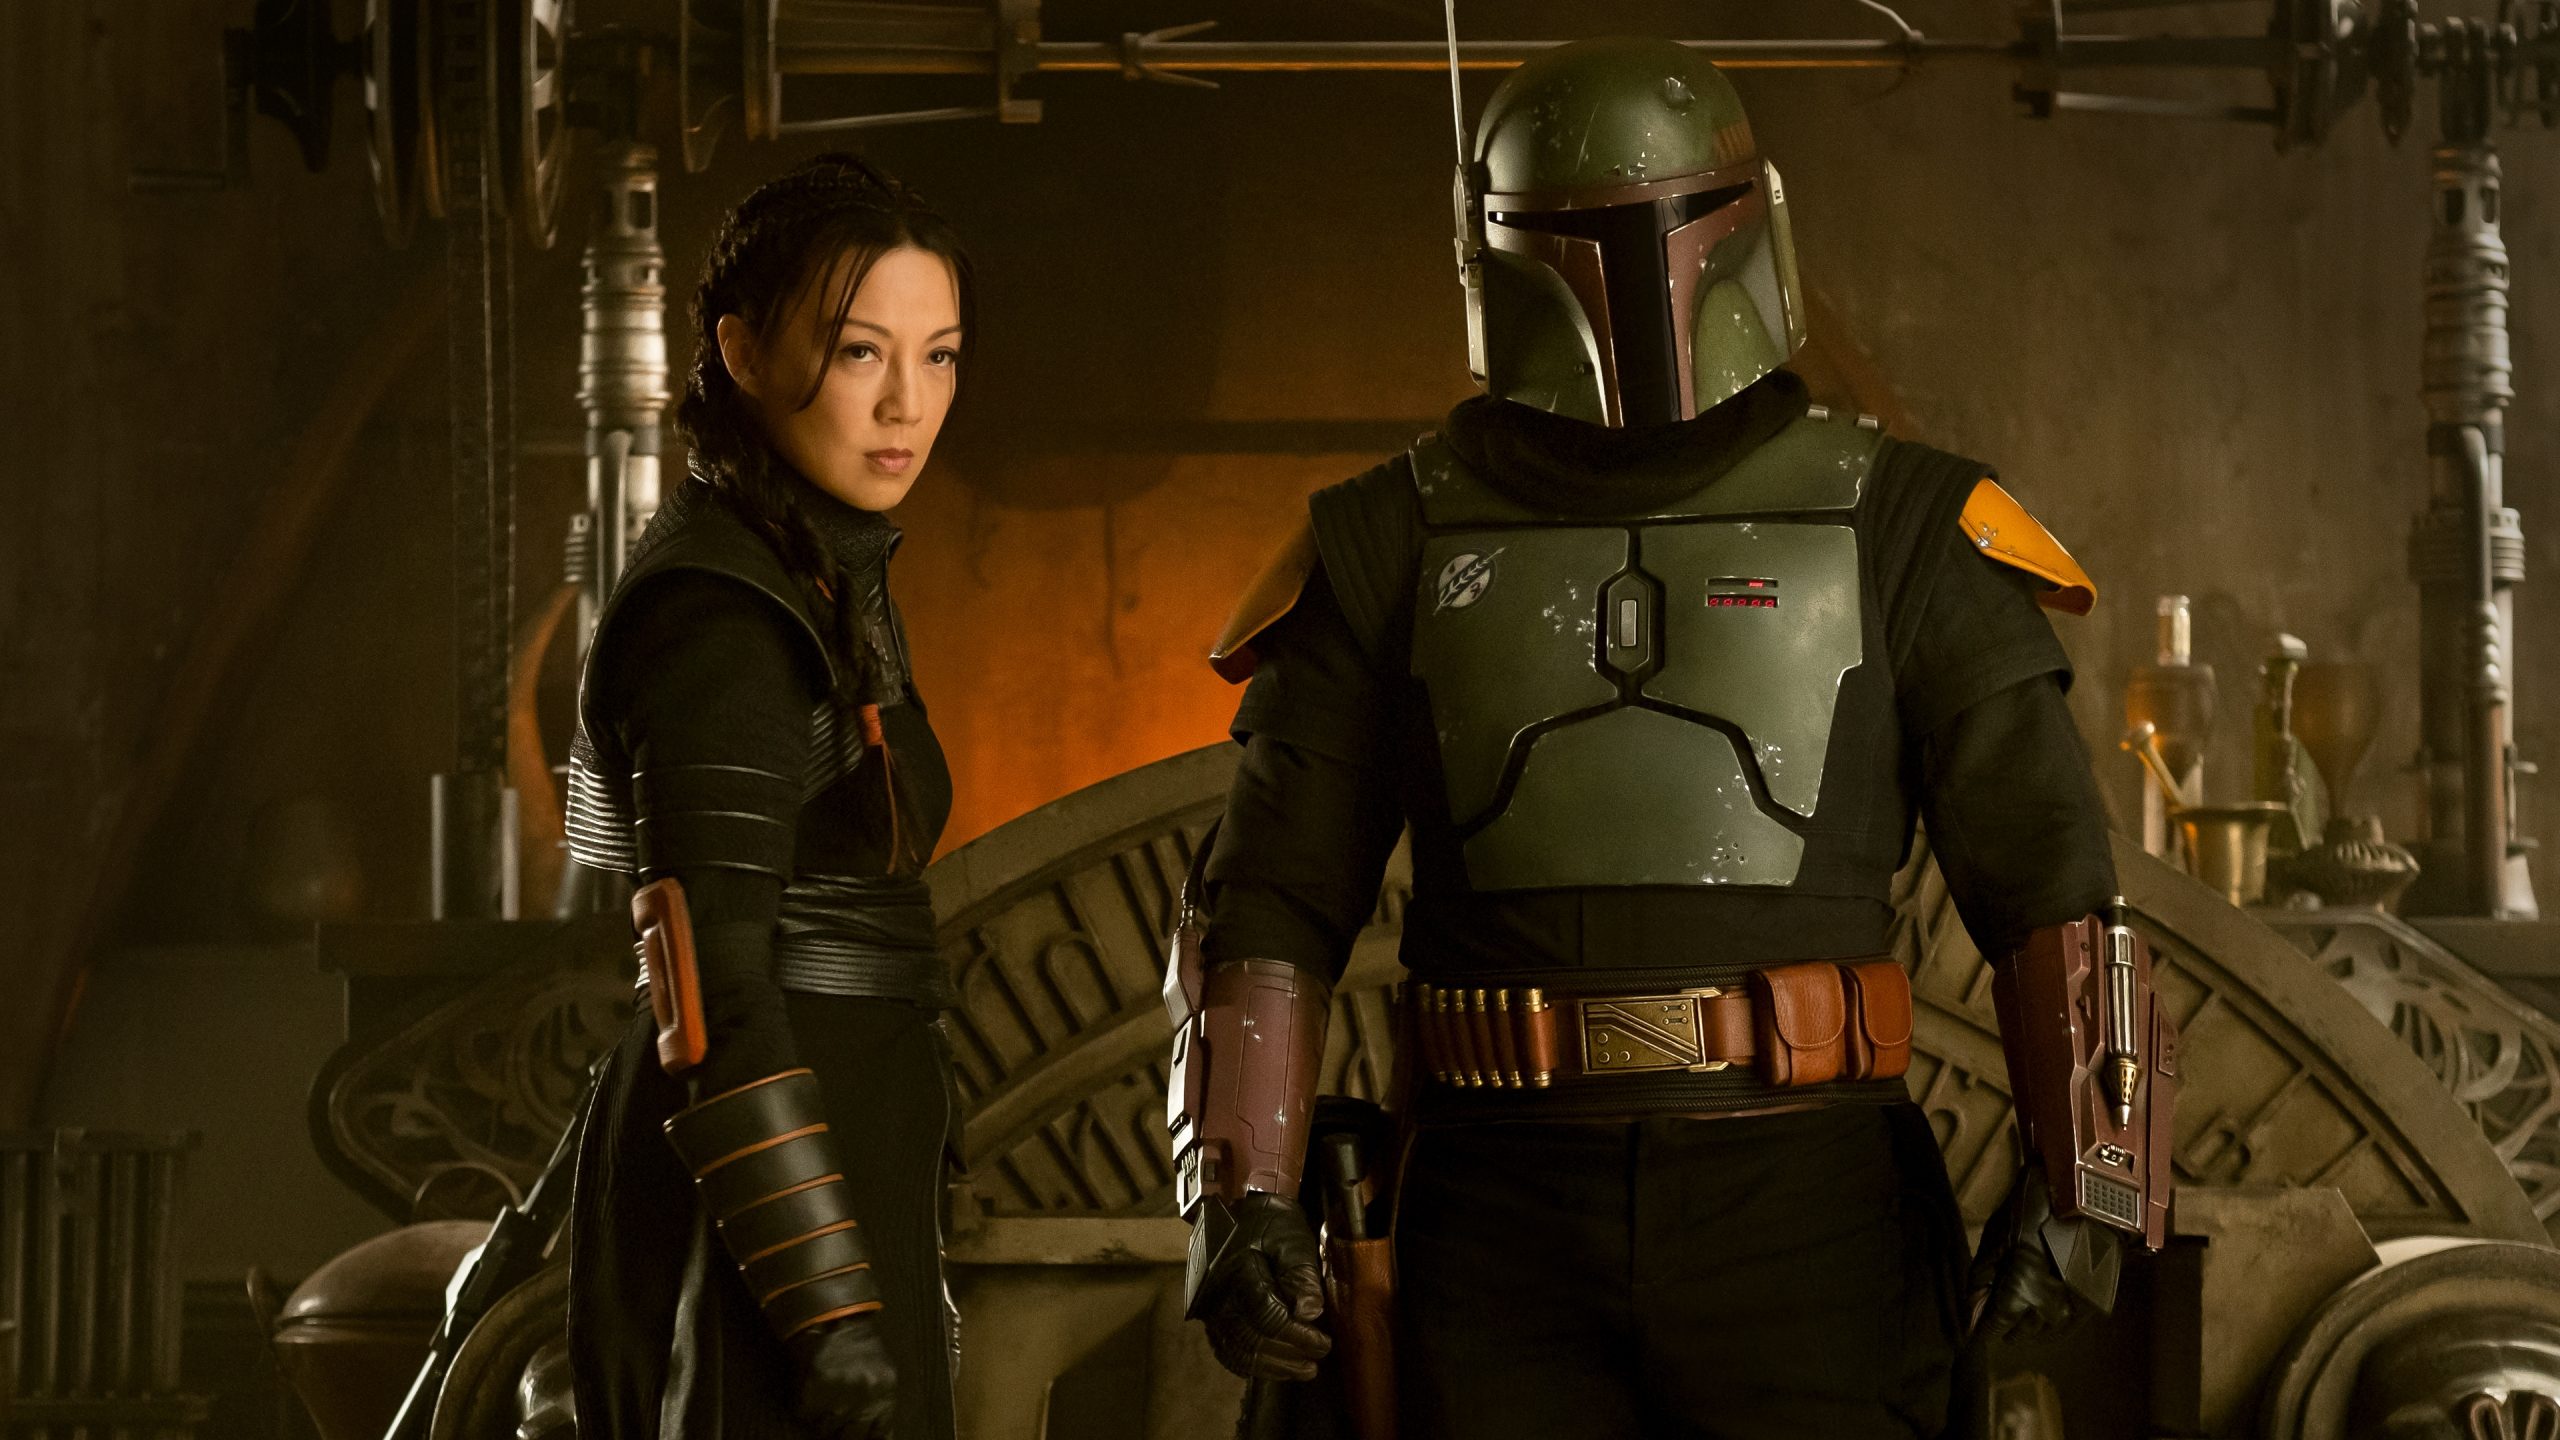 The Book of Boba Fett brings home an Emmy® at the 74th Primetime Creative Arts Emmy Awards